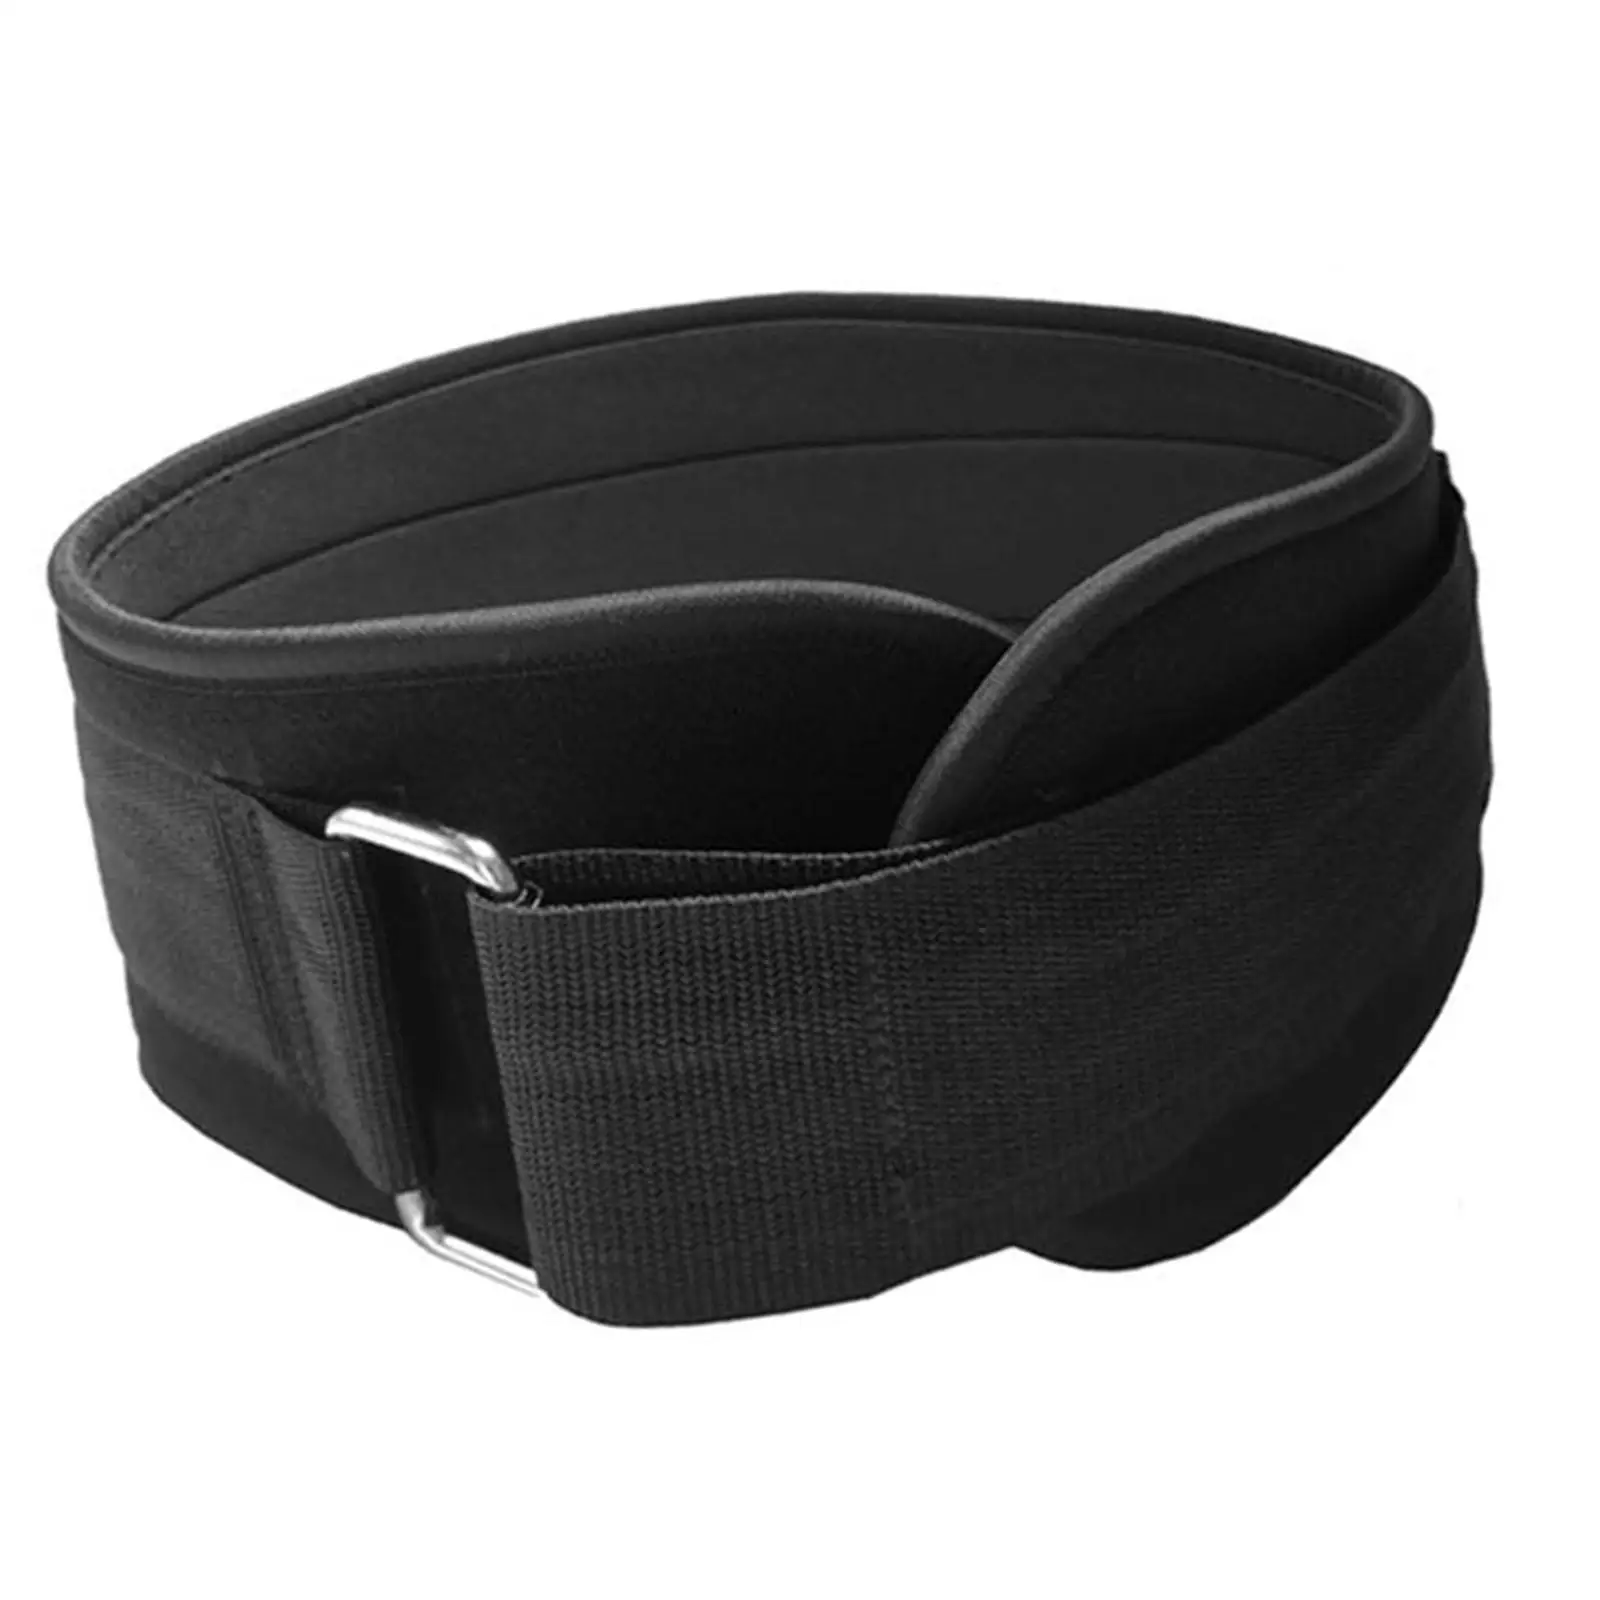 Wasit Brace Abdominal Protector Weight Lifting Belts Bodybuilding Deadlift Back Supporting Back Supporting Belt for Sweat Belt